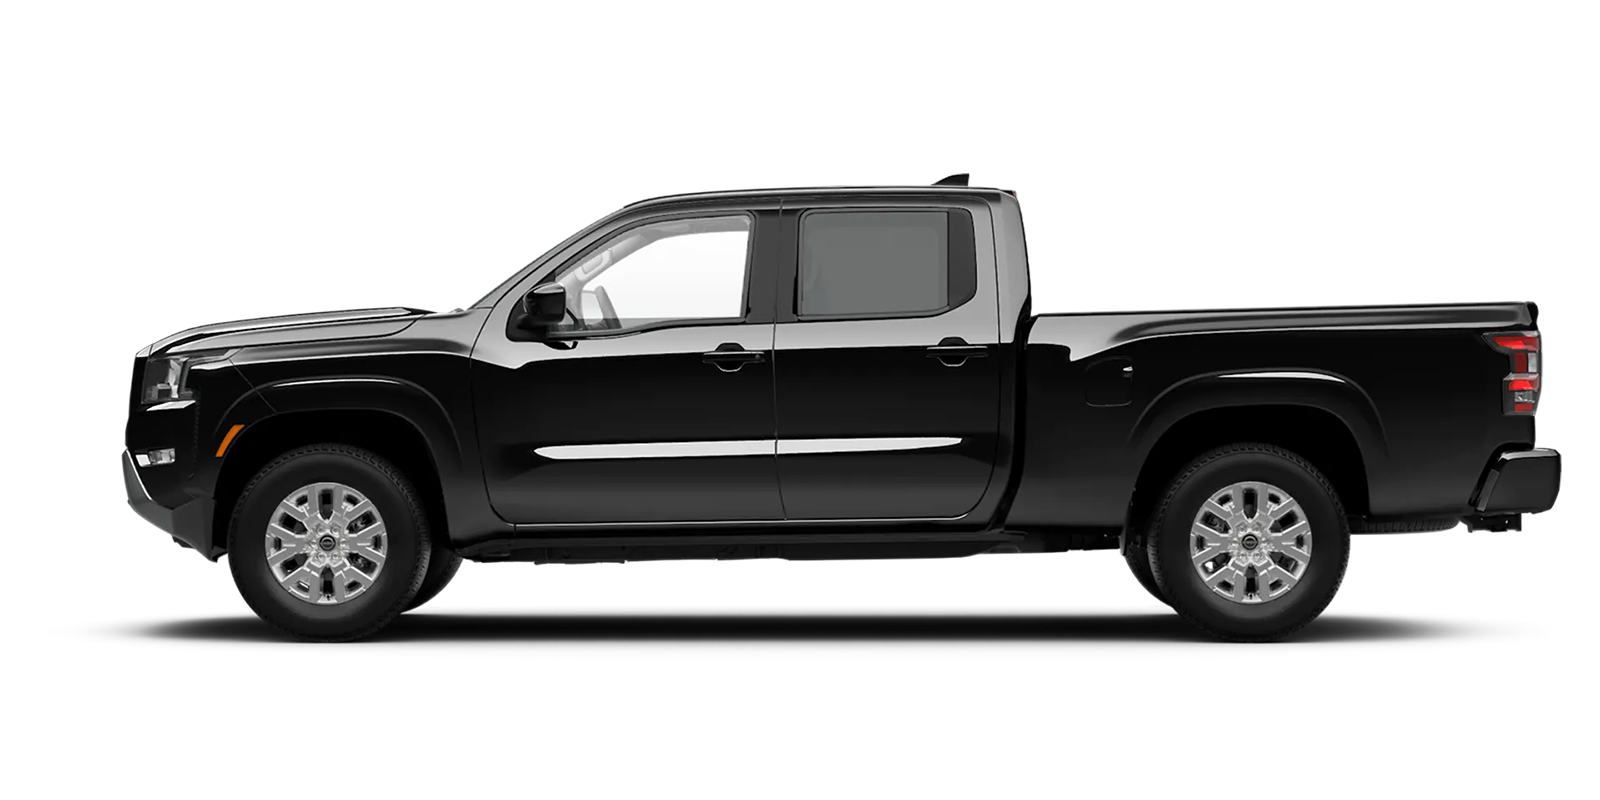 2022 Frontier Crew Cab Long Bed SV 4x2 in Super Black | Nationwide Nissan in Timonium MD